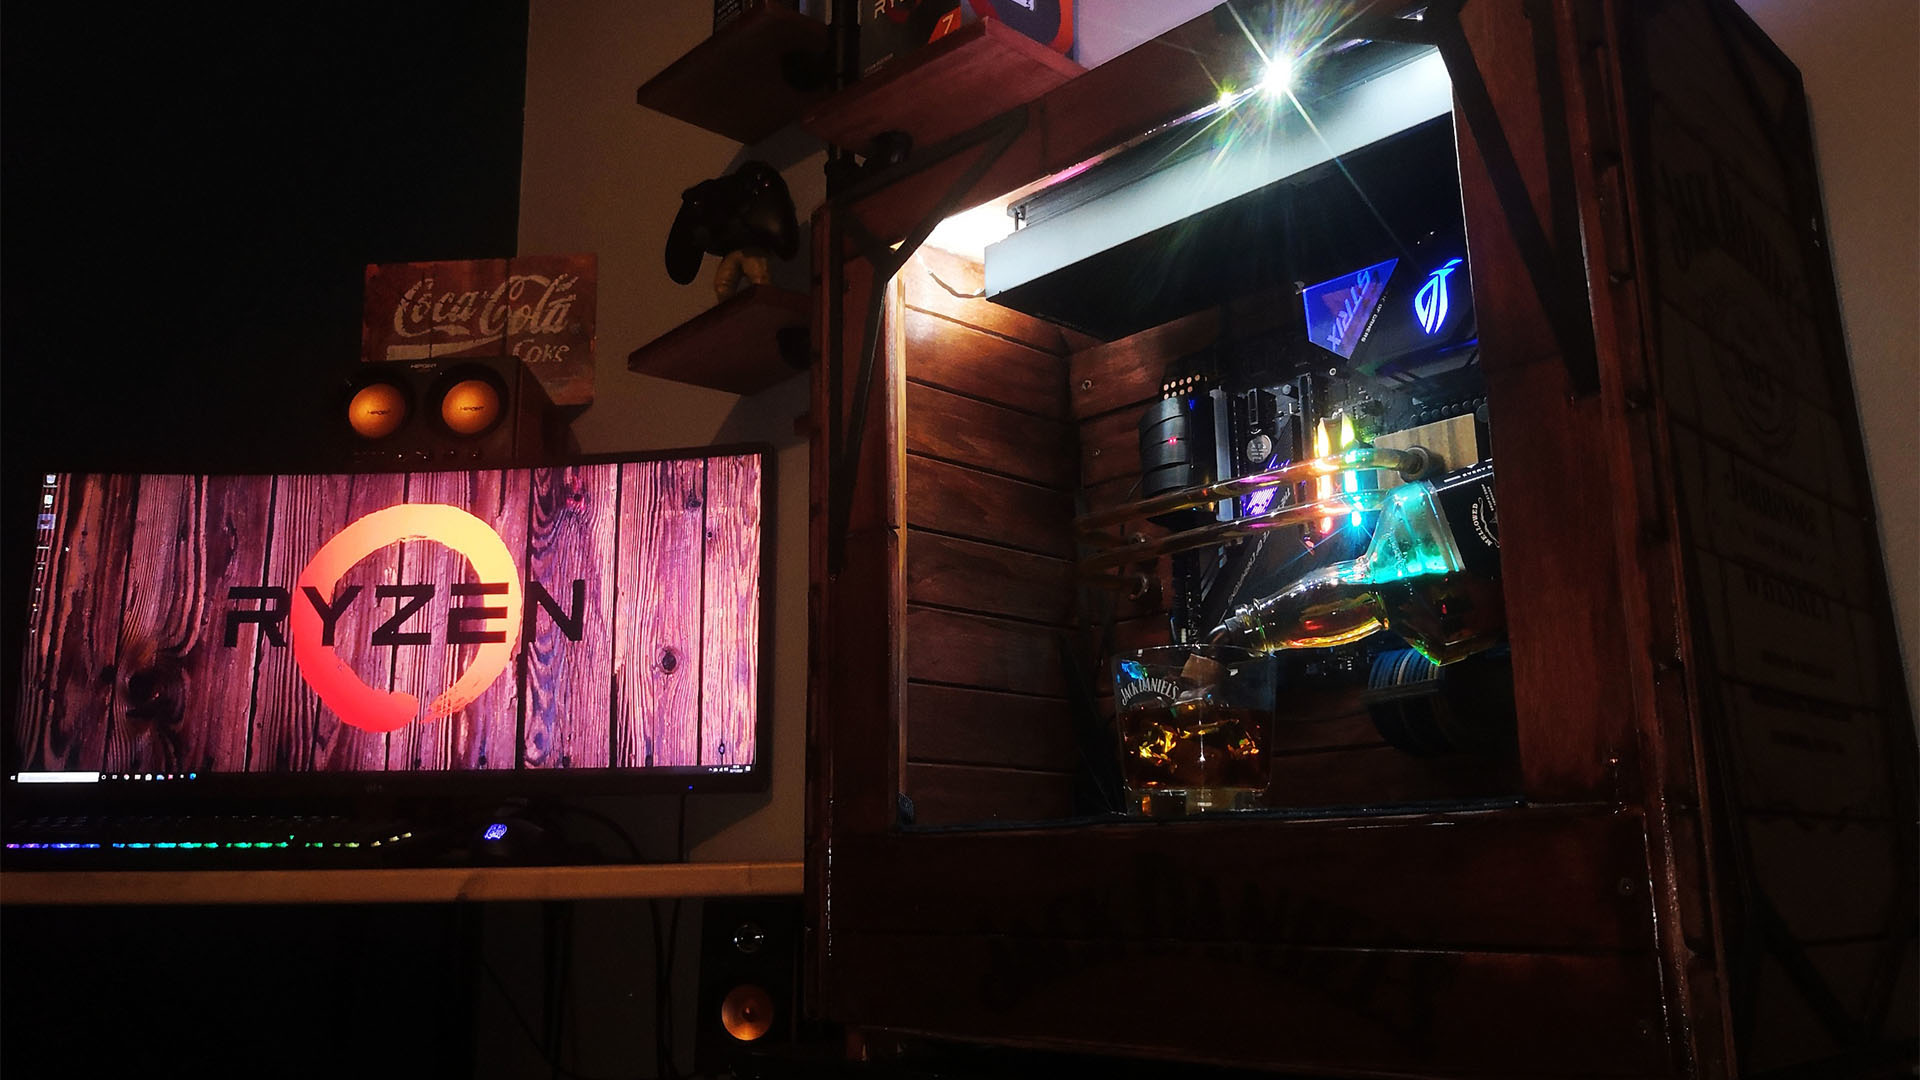 The Jack Daniel's gaming PC on a desk next to a gaming monitor